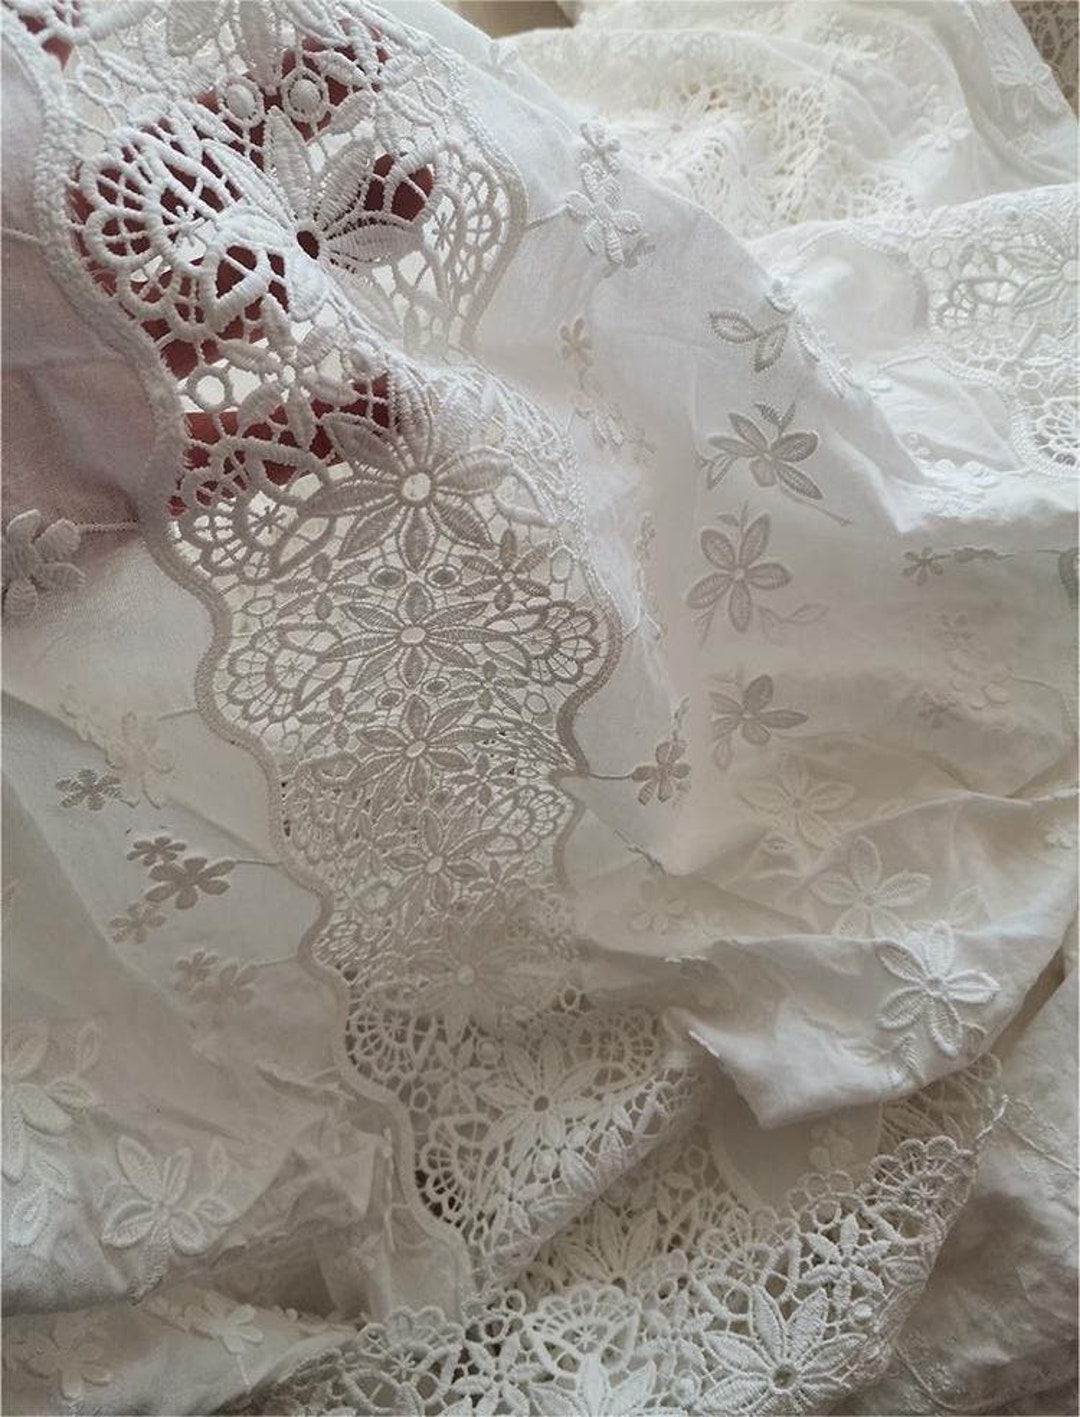 White Lace Cotton Fabricembroidered Floral Fabrictablecloth - Etsy